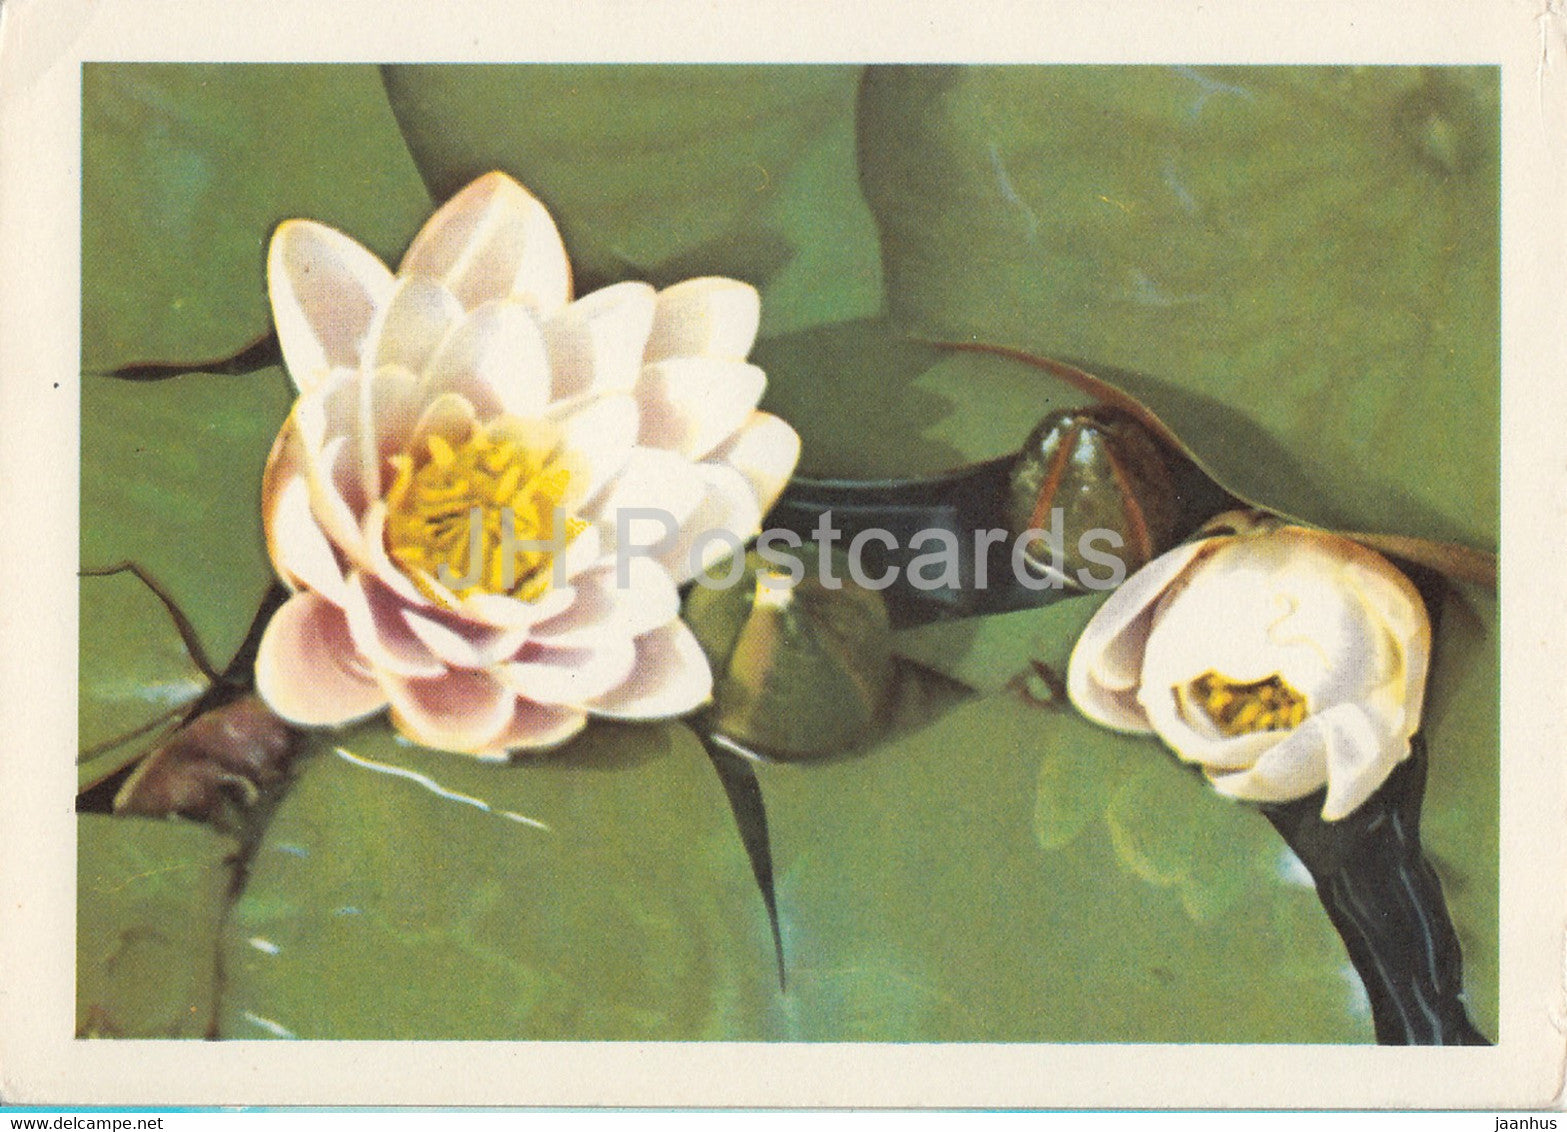 Water Lily - plants - postal stationery - 1966 - Russia USSR - unused - JH Postcards